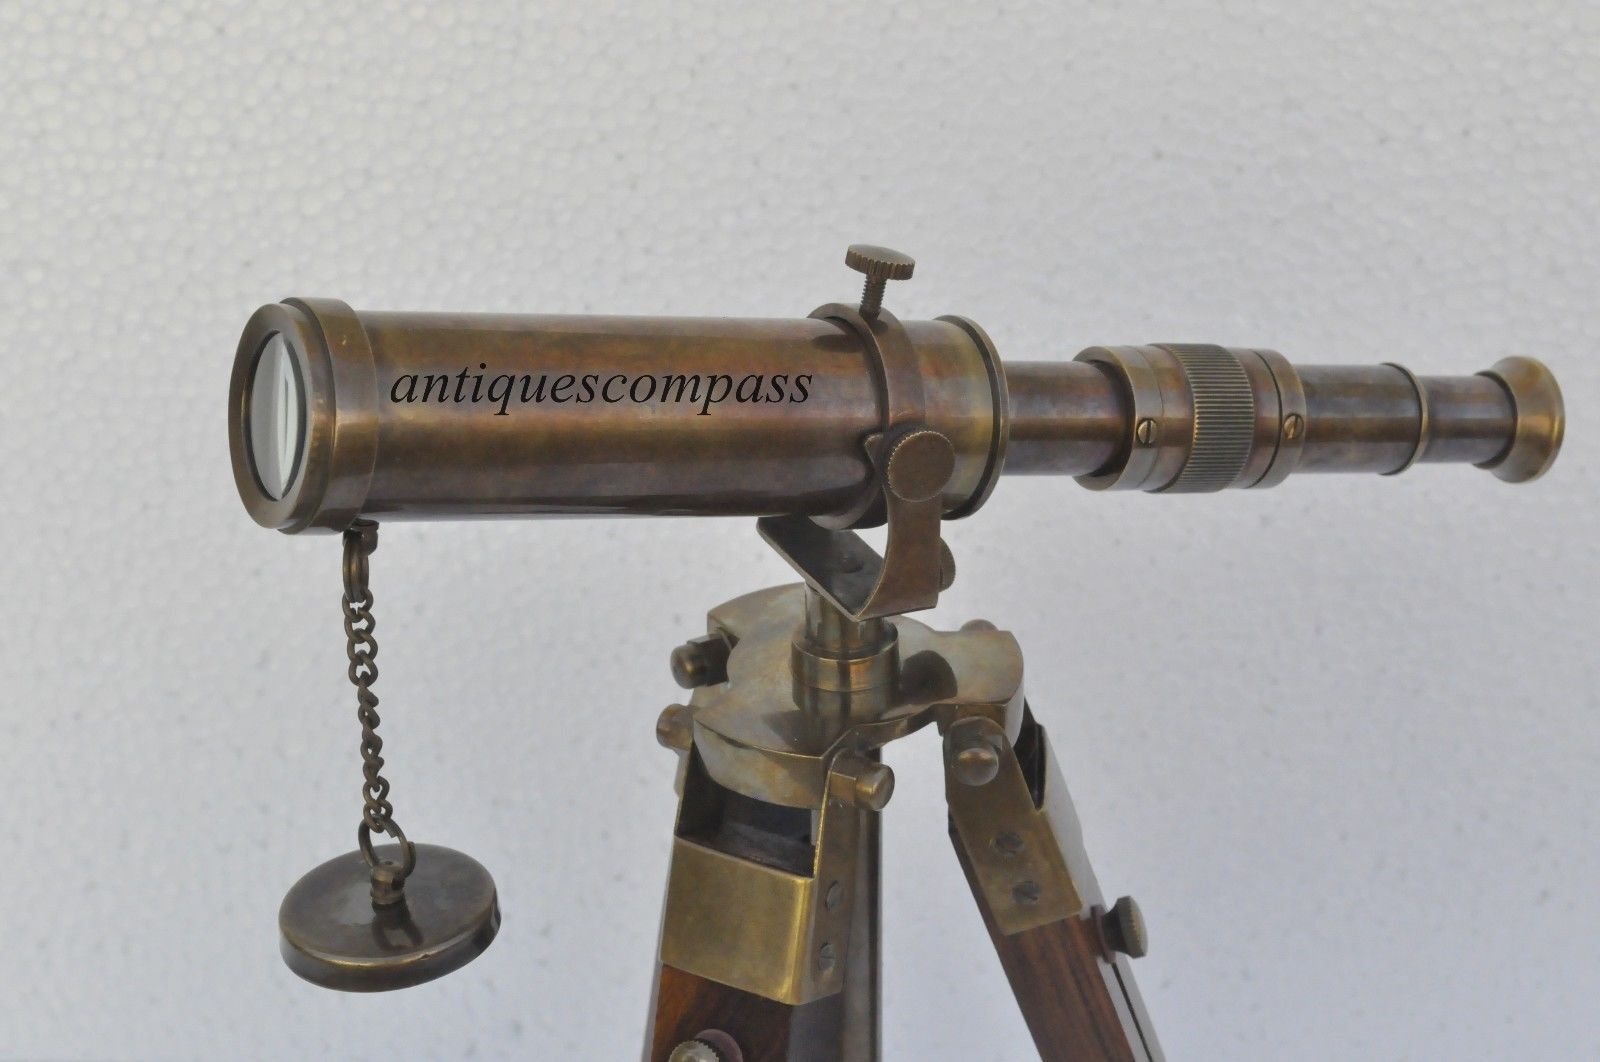 Antique Nautical Vintage Decorative Solid Brass with Wooden Tripod Telescope 